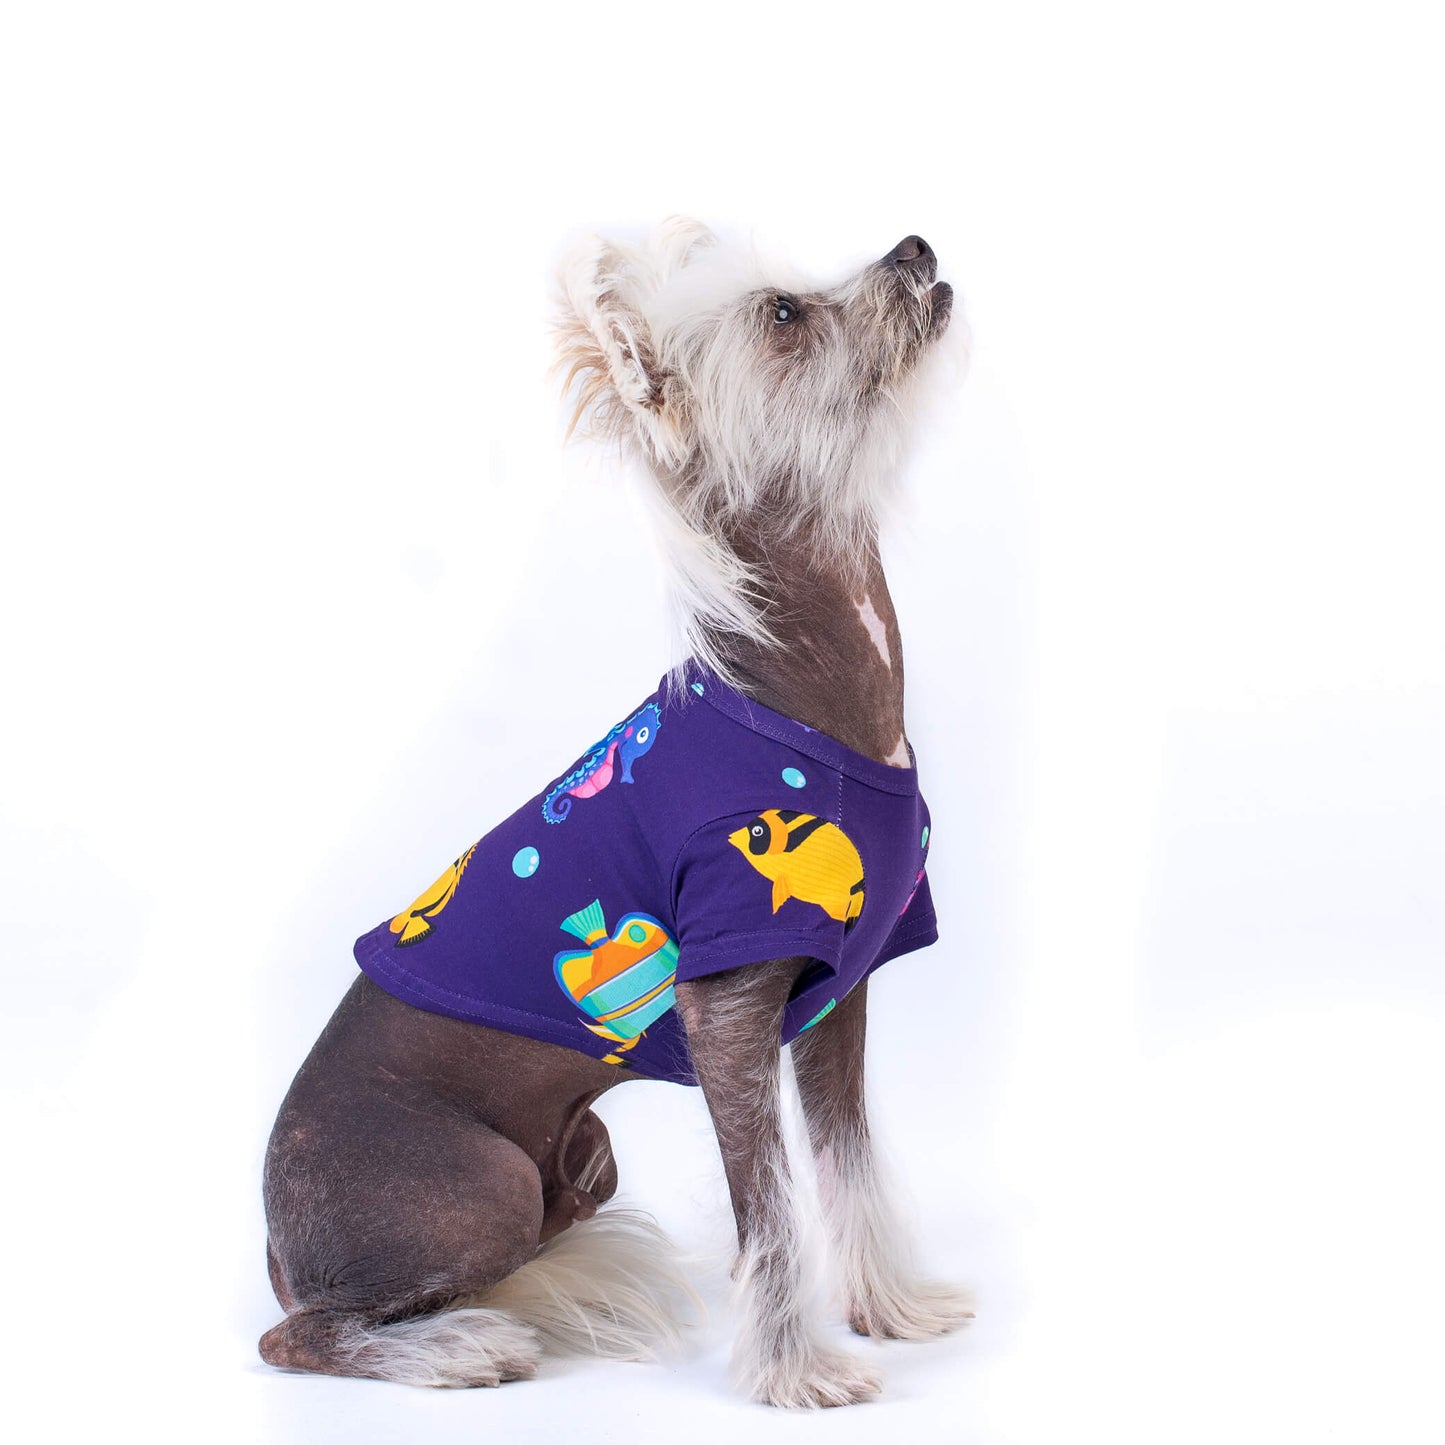 A Chinese Crested dog wearing the "Magic Sea" shirt by Vibrant Hound. The shirt is purple and features vibrant tropical fish prints. The dog is facing sideways, showcasing the colorful design.